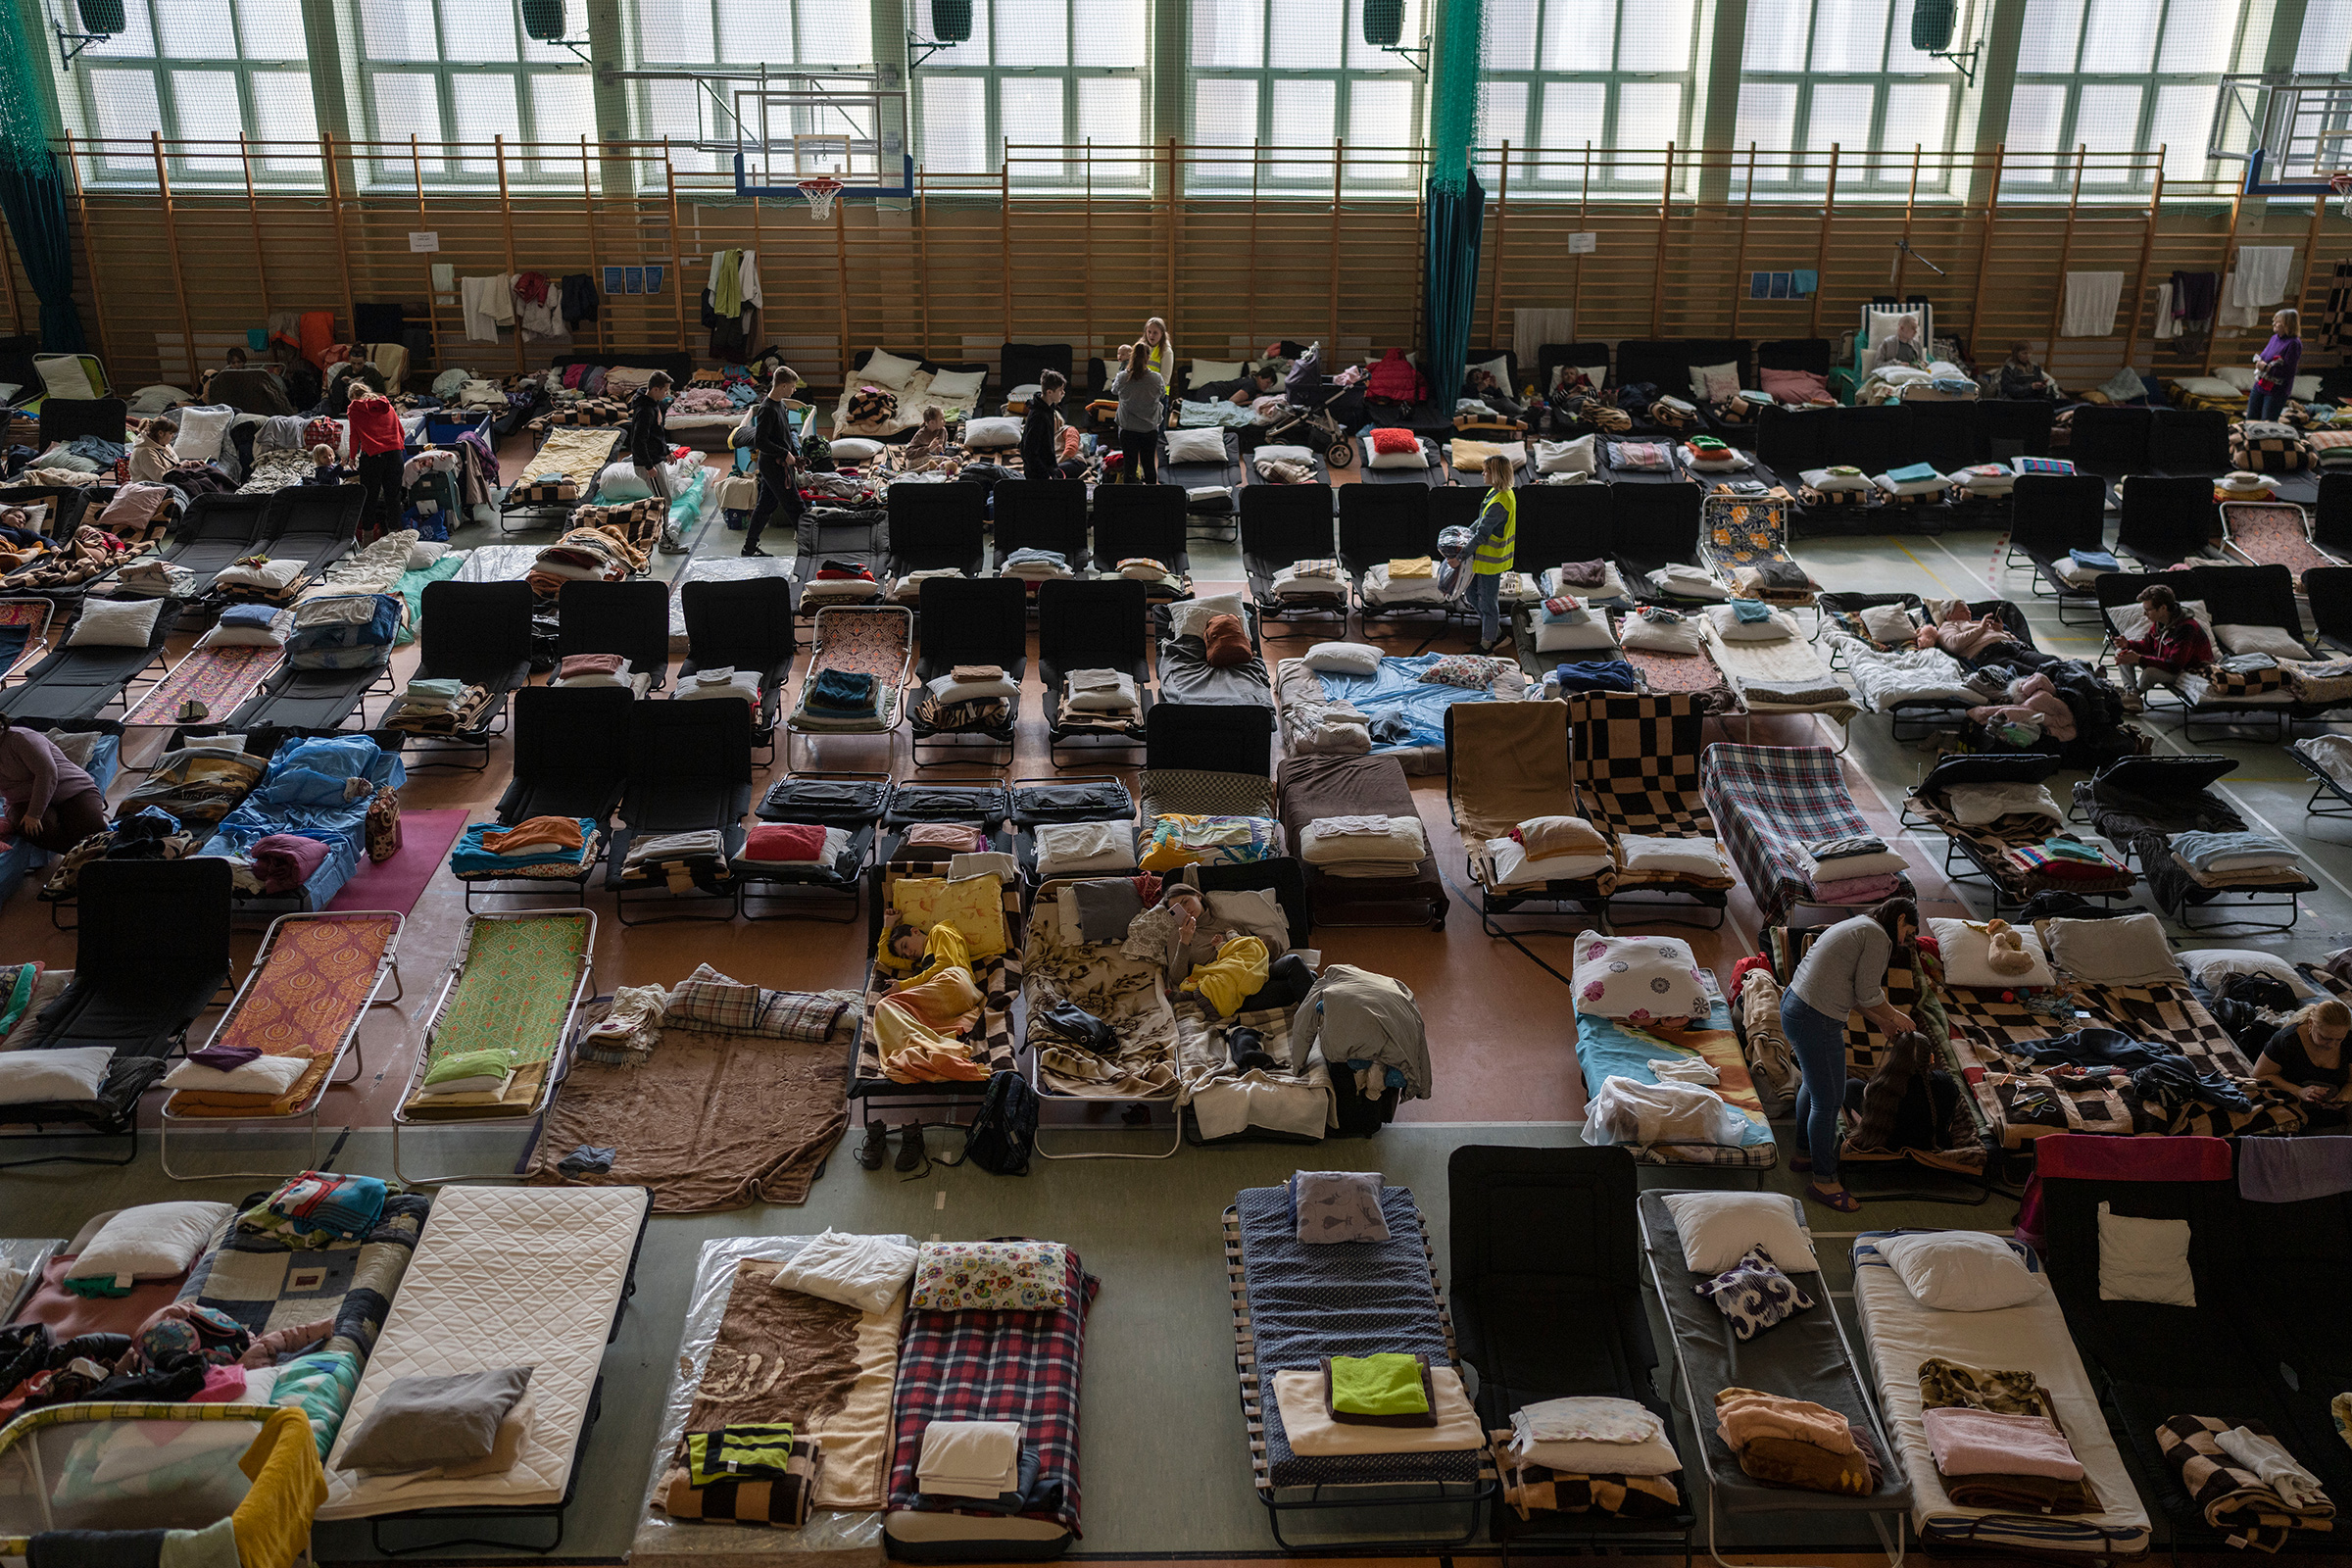 An indoor sports stadium being used as a refugee center, Medyka village, a border crossing between Poland and Ukraine, March 15 (Petros Giannakouris—AP)